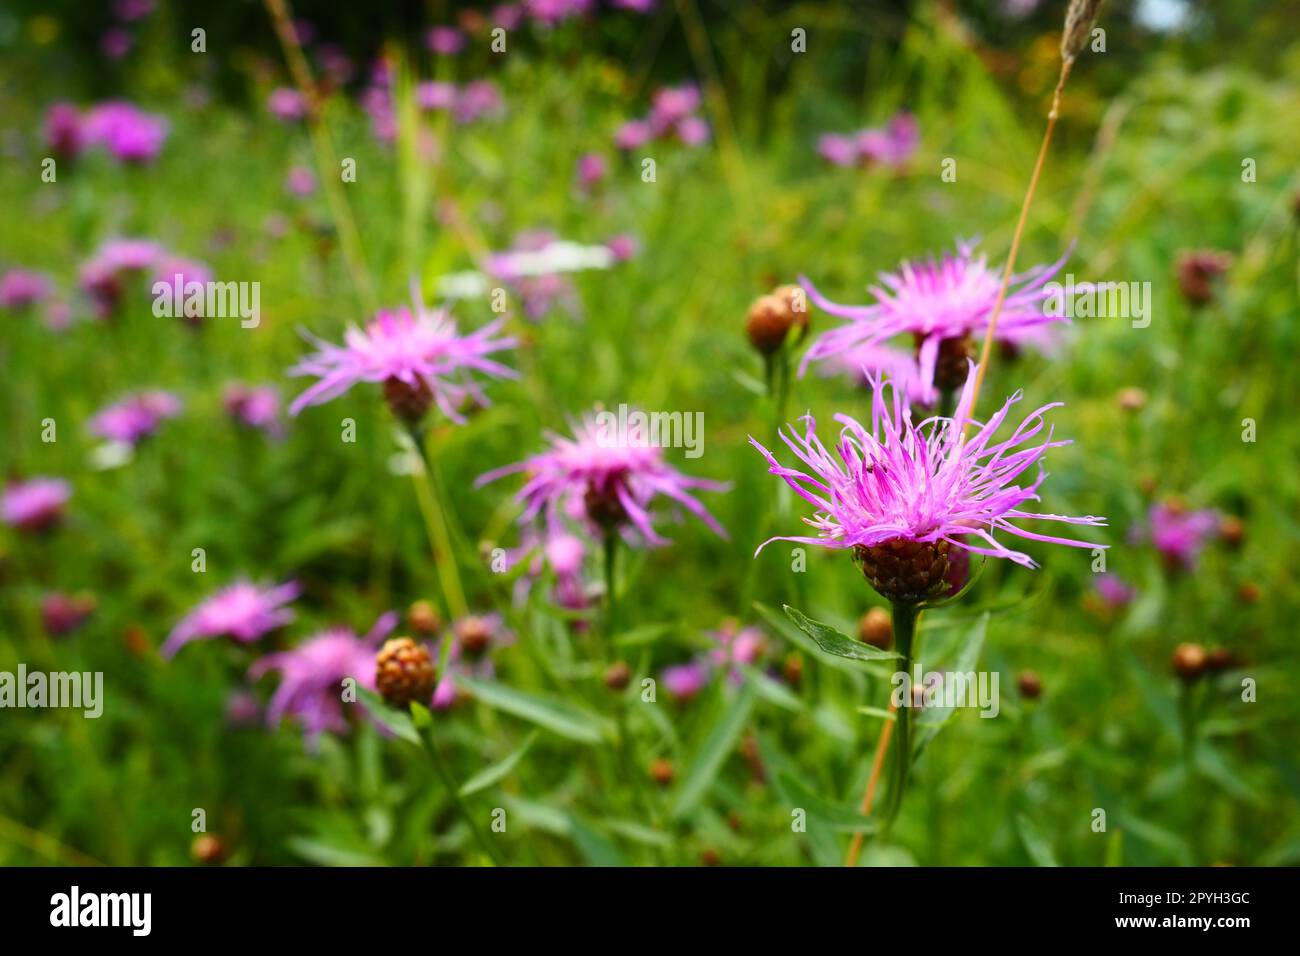 Meadow cornflower Centaurea jacea is a field weed plant, a species of the genus Cornflower of the family Asteraceae, or Compositae. Grows in meadows and forest edges. Violet elegant flower. Karelia Stock Photo